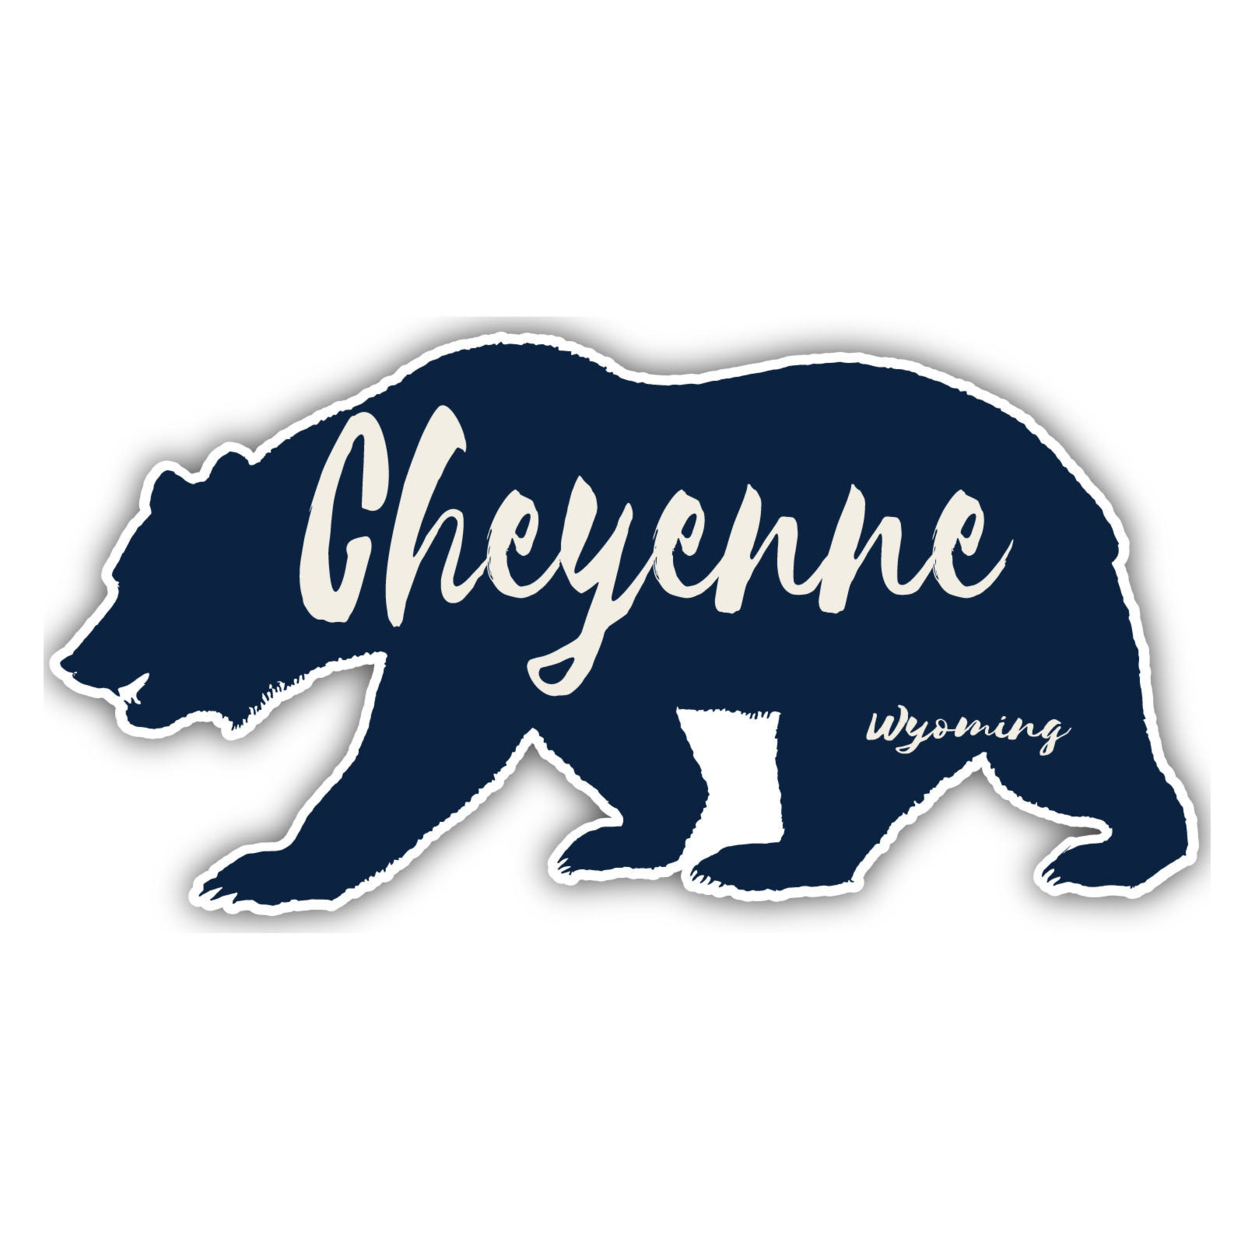 Cheyenne Wyoming Souvenir Decorative Stickers (Choose Theme And Size) - 4-Pack, 10-Inch, Tent